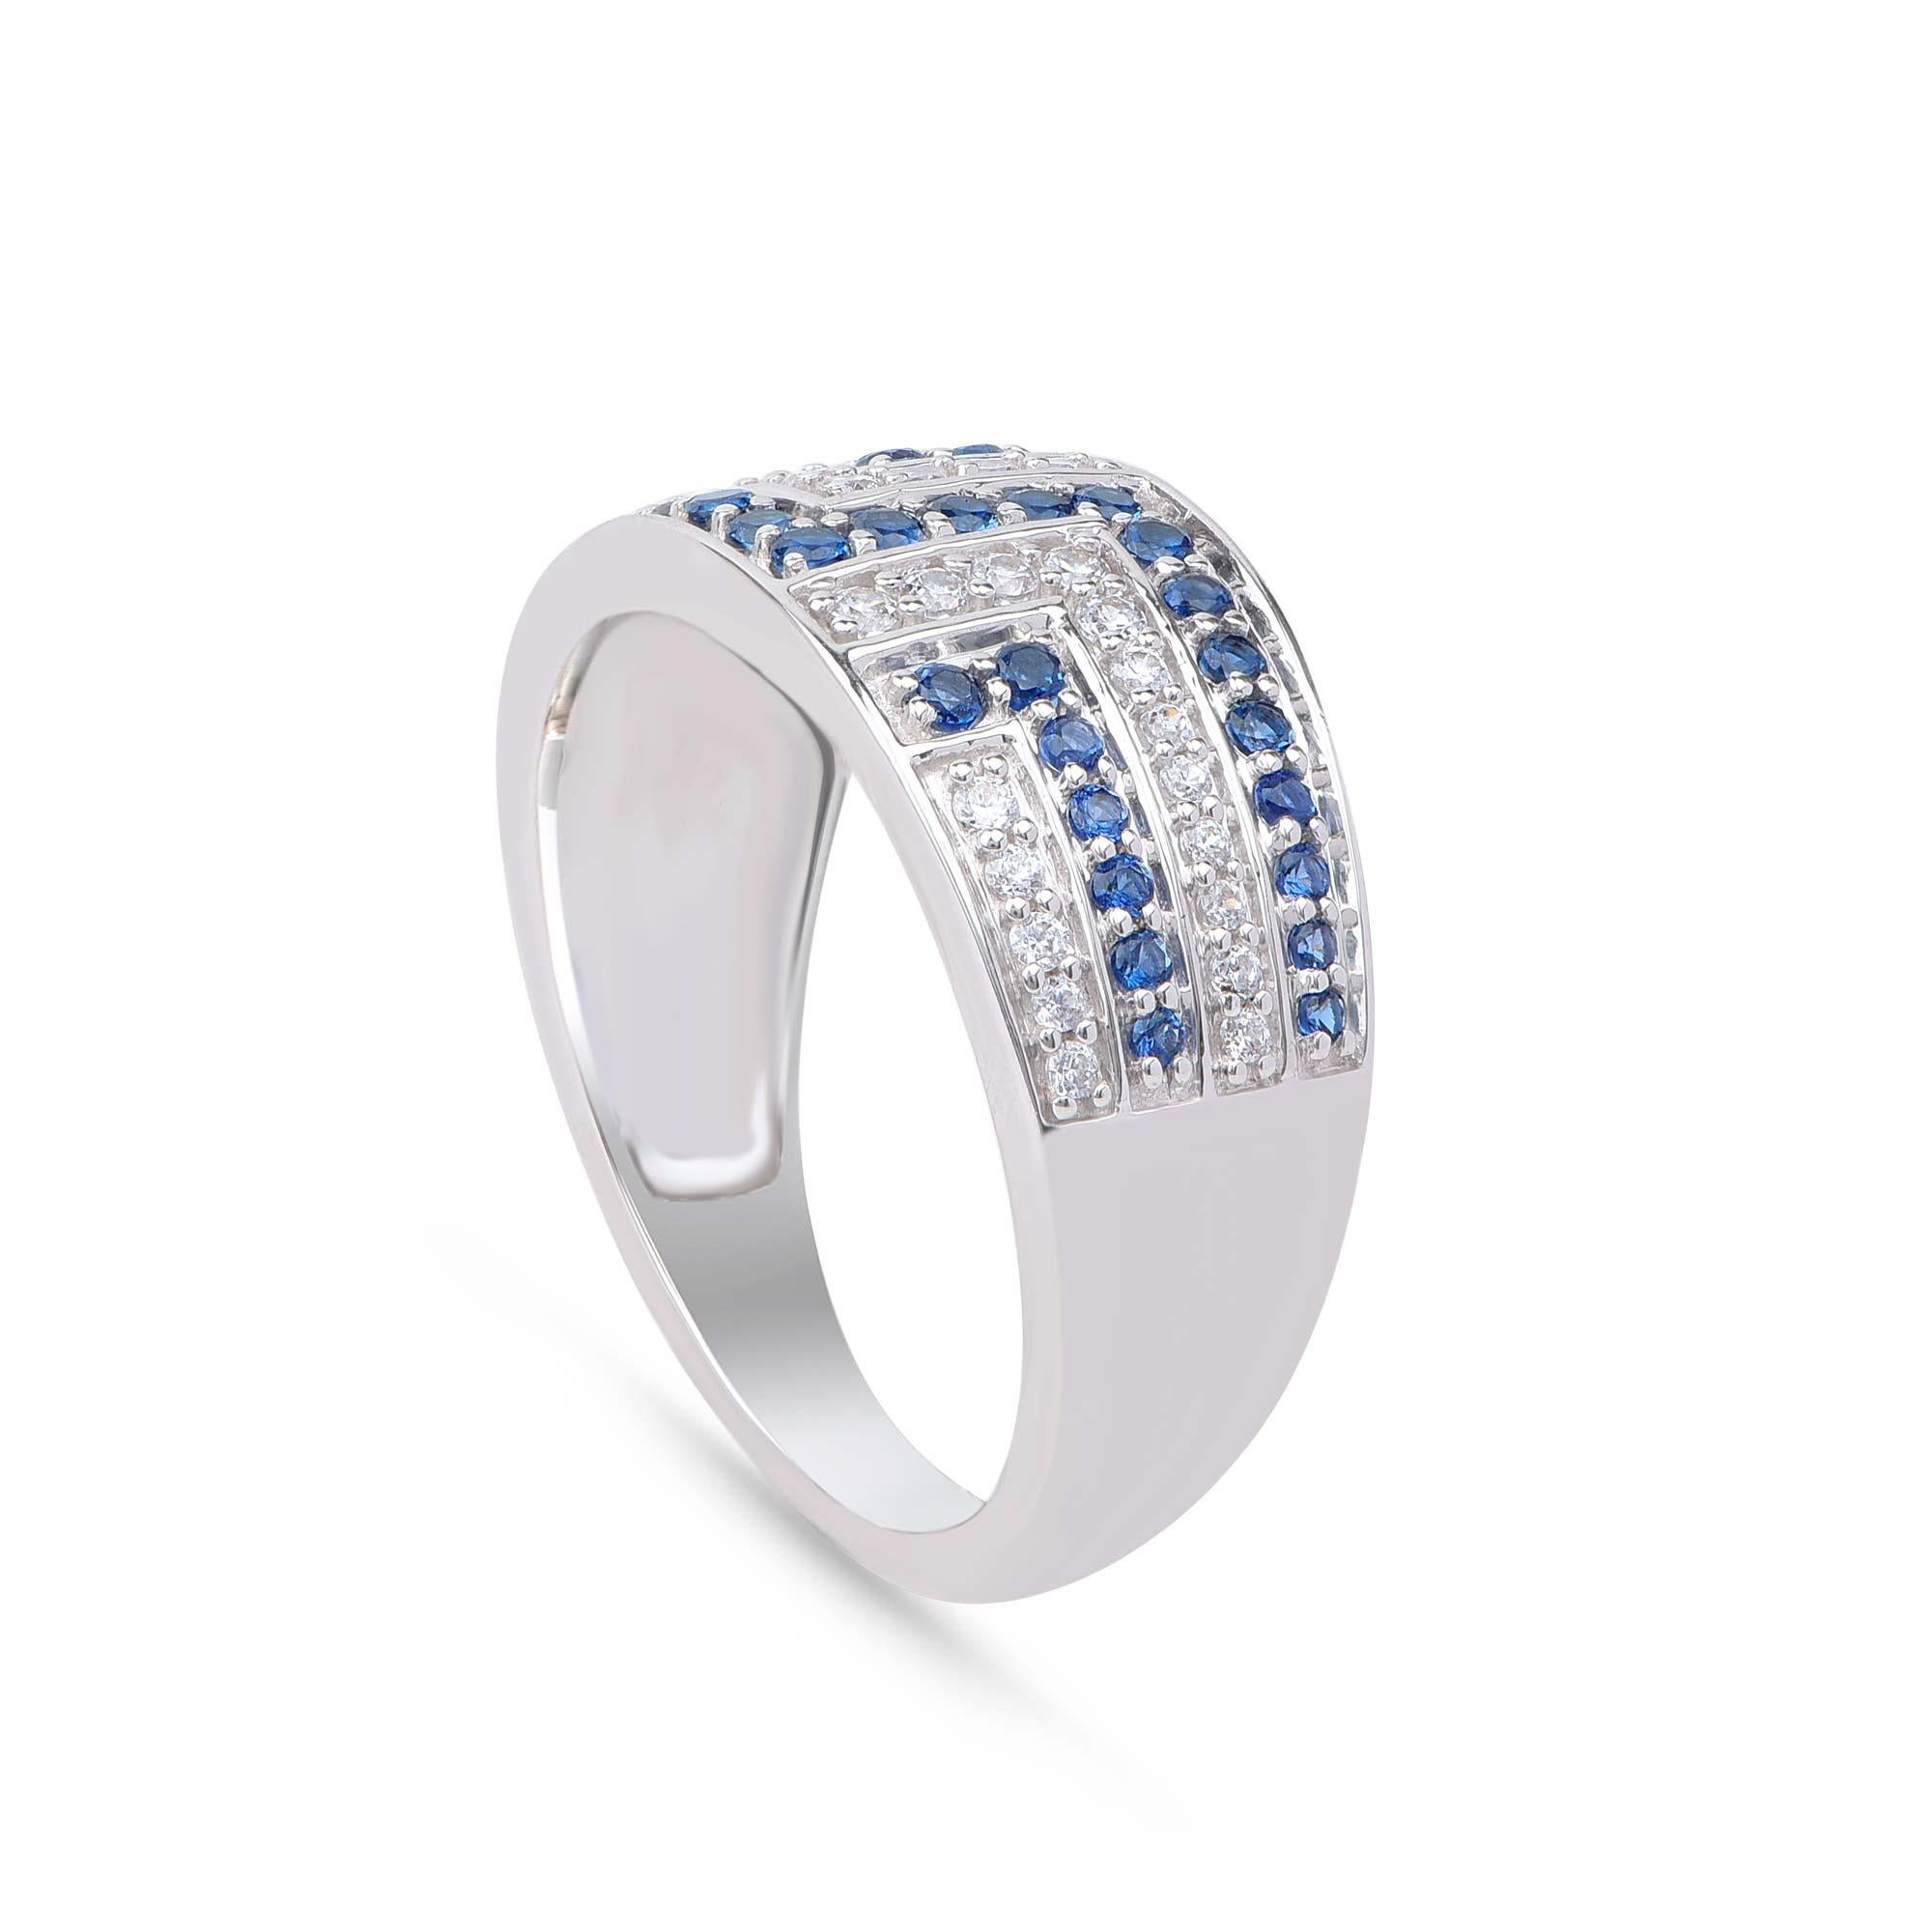 Embedded with 34 brilliant cut diamonds and 35 blue sapphire in pave setting and designed by experts in 18-karat white gold. Diamonds are graded H-I Color, I2 Clarity. 

Metal color and ring size can be customized on request. 

This piece is made to